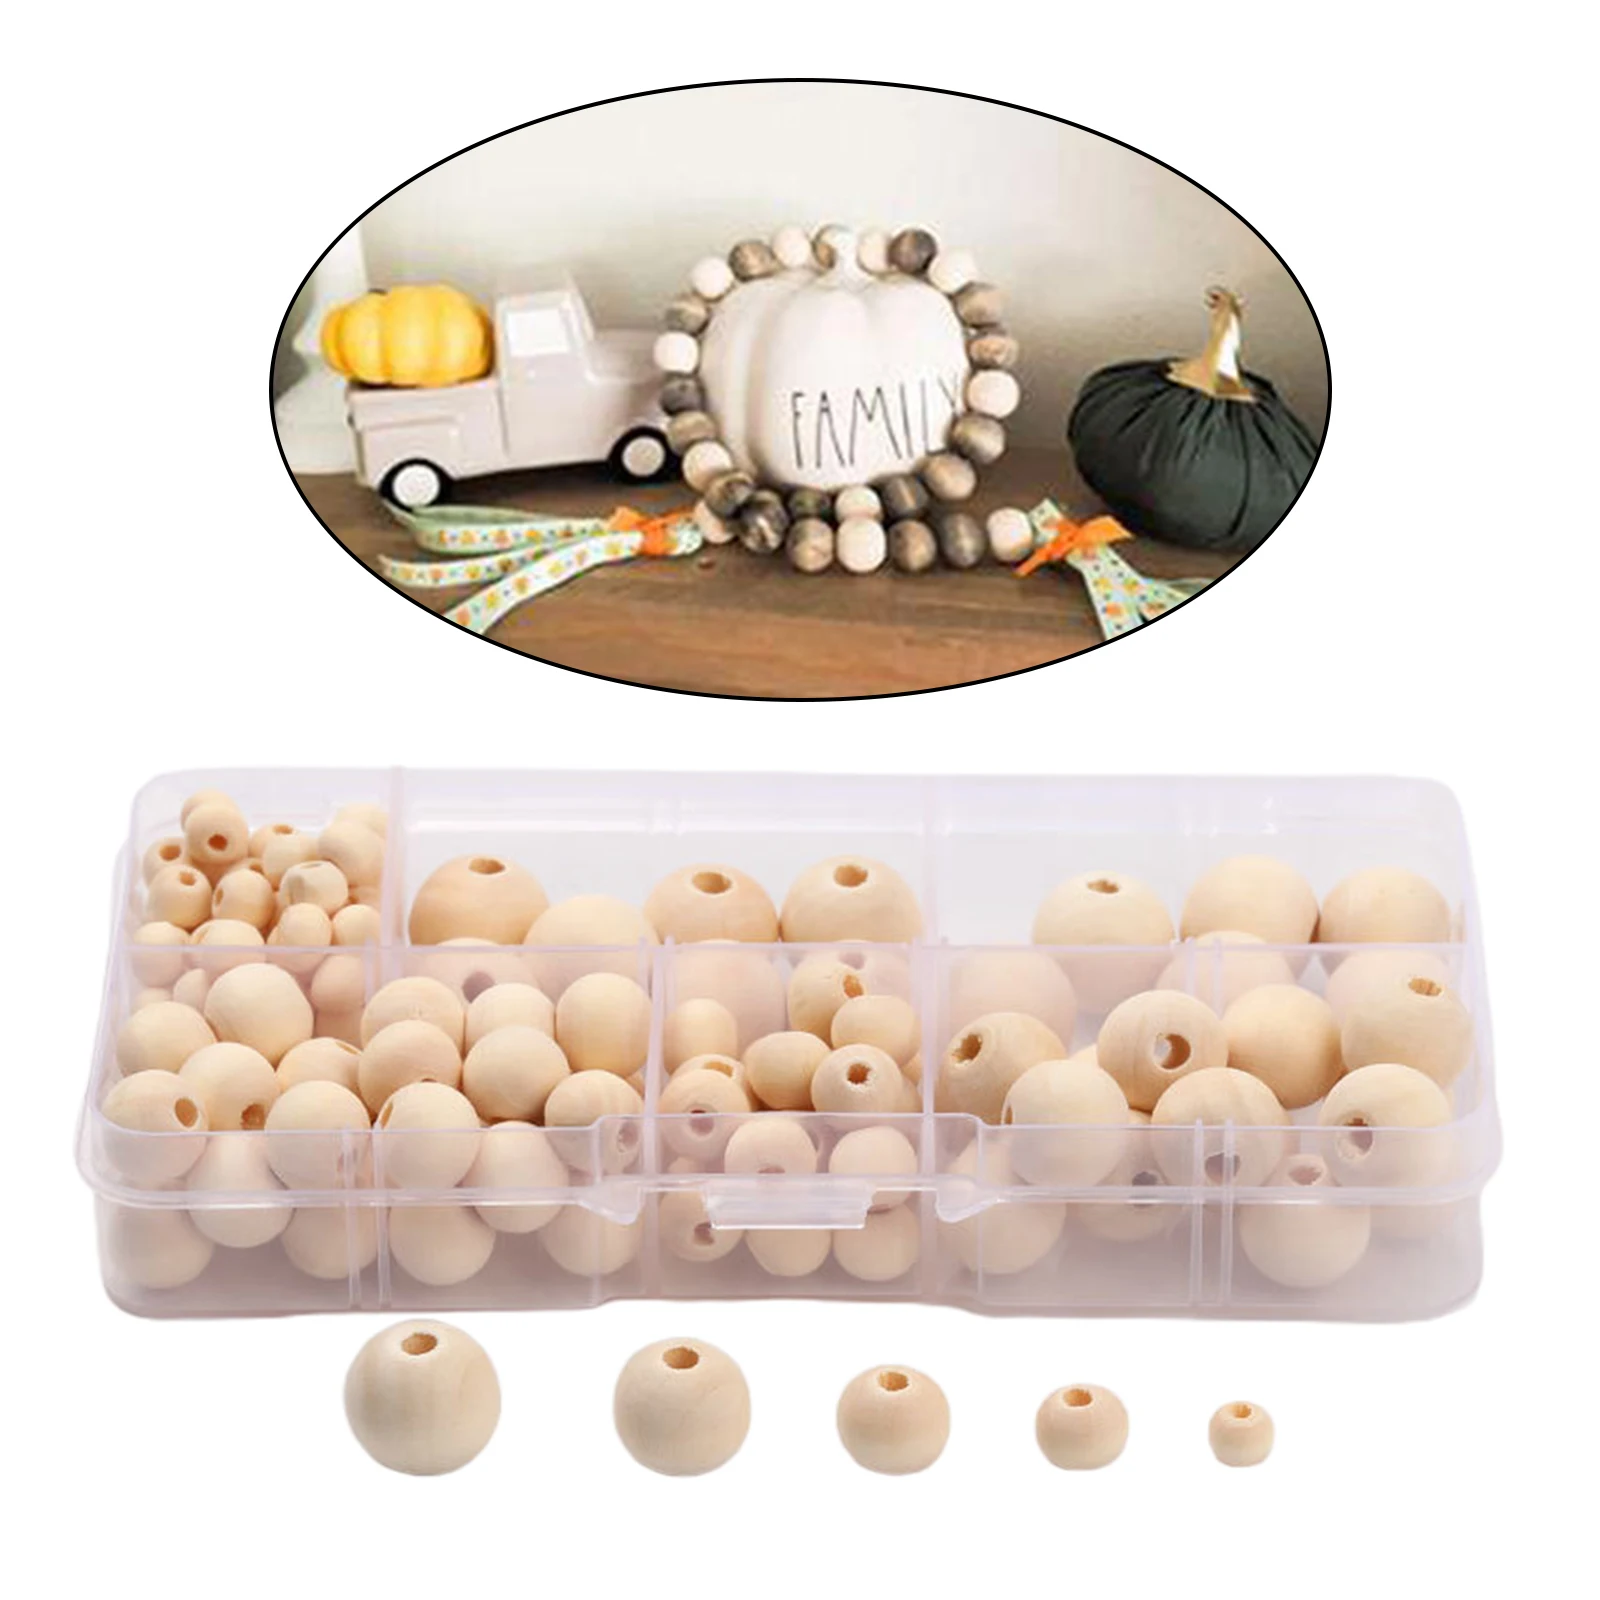 300pcs Natural Round Wood Bead Unpainted Wooden Ball Beads DIY Craft Jewelry